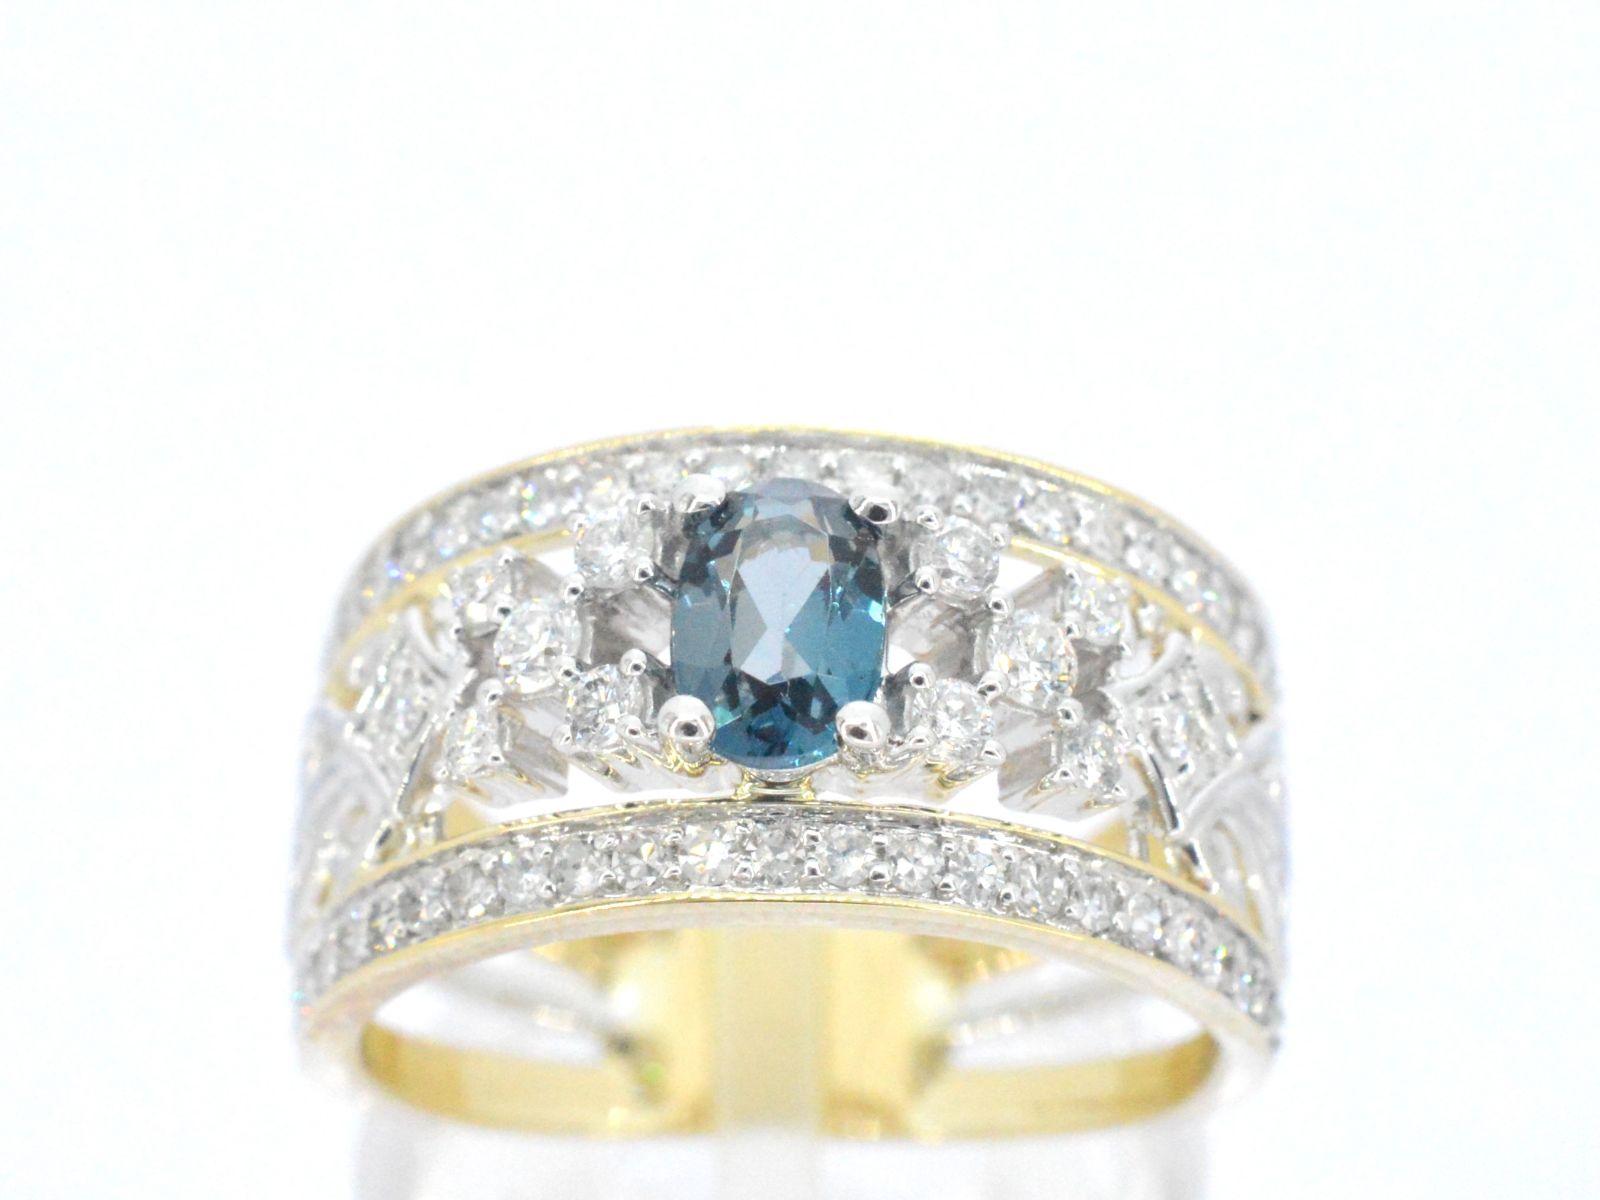 This exclusive gold ring is a dazzling display of luxury and elegance, featuring an array of sparkling diamonds and a brilliant topaz gemstone. The intricate design of the ring highlights the natural beauty of the topaz, while the diamonds add an